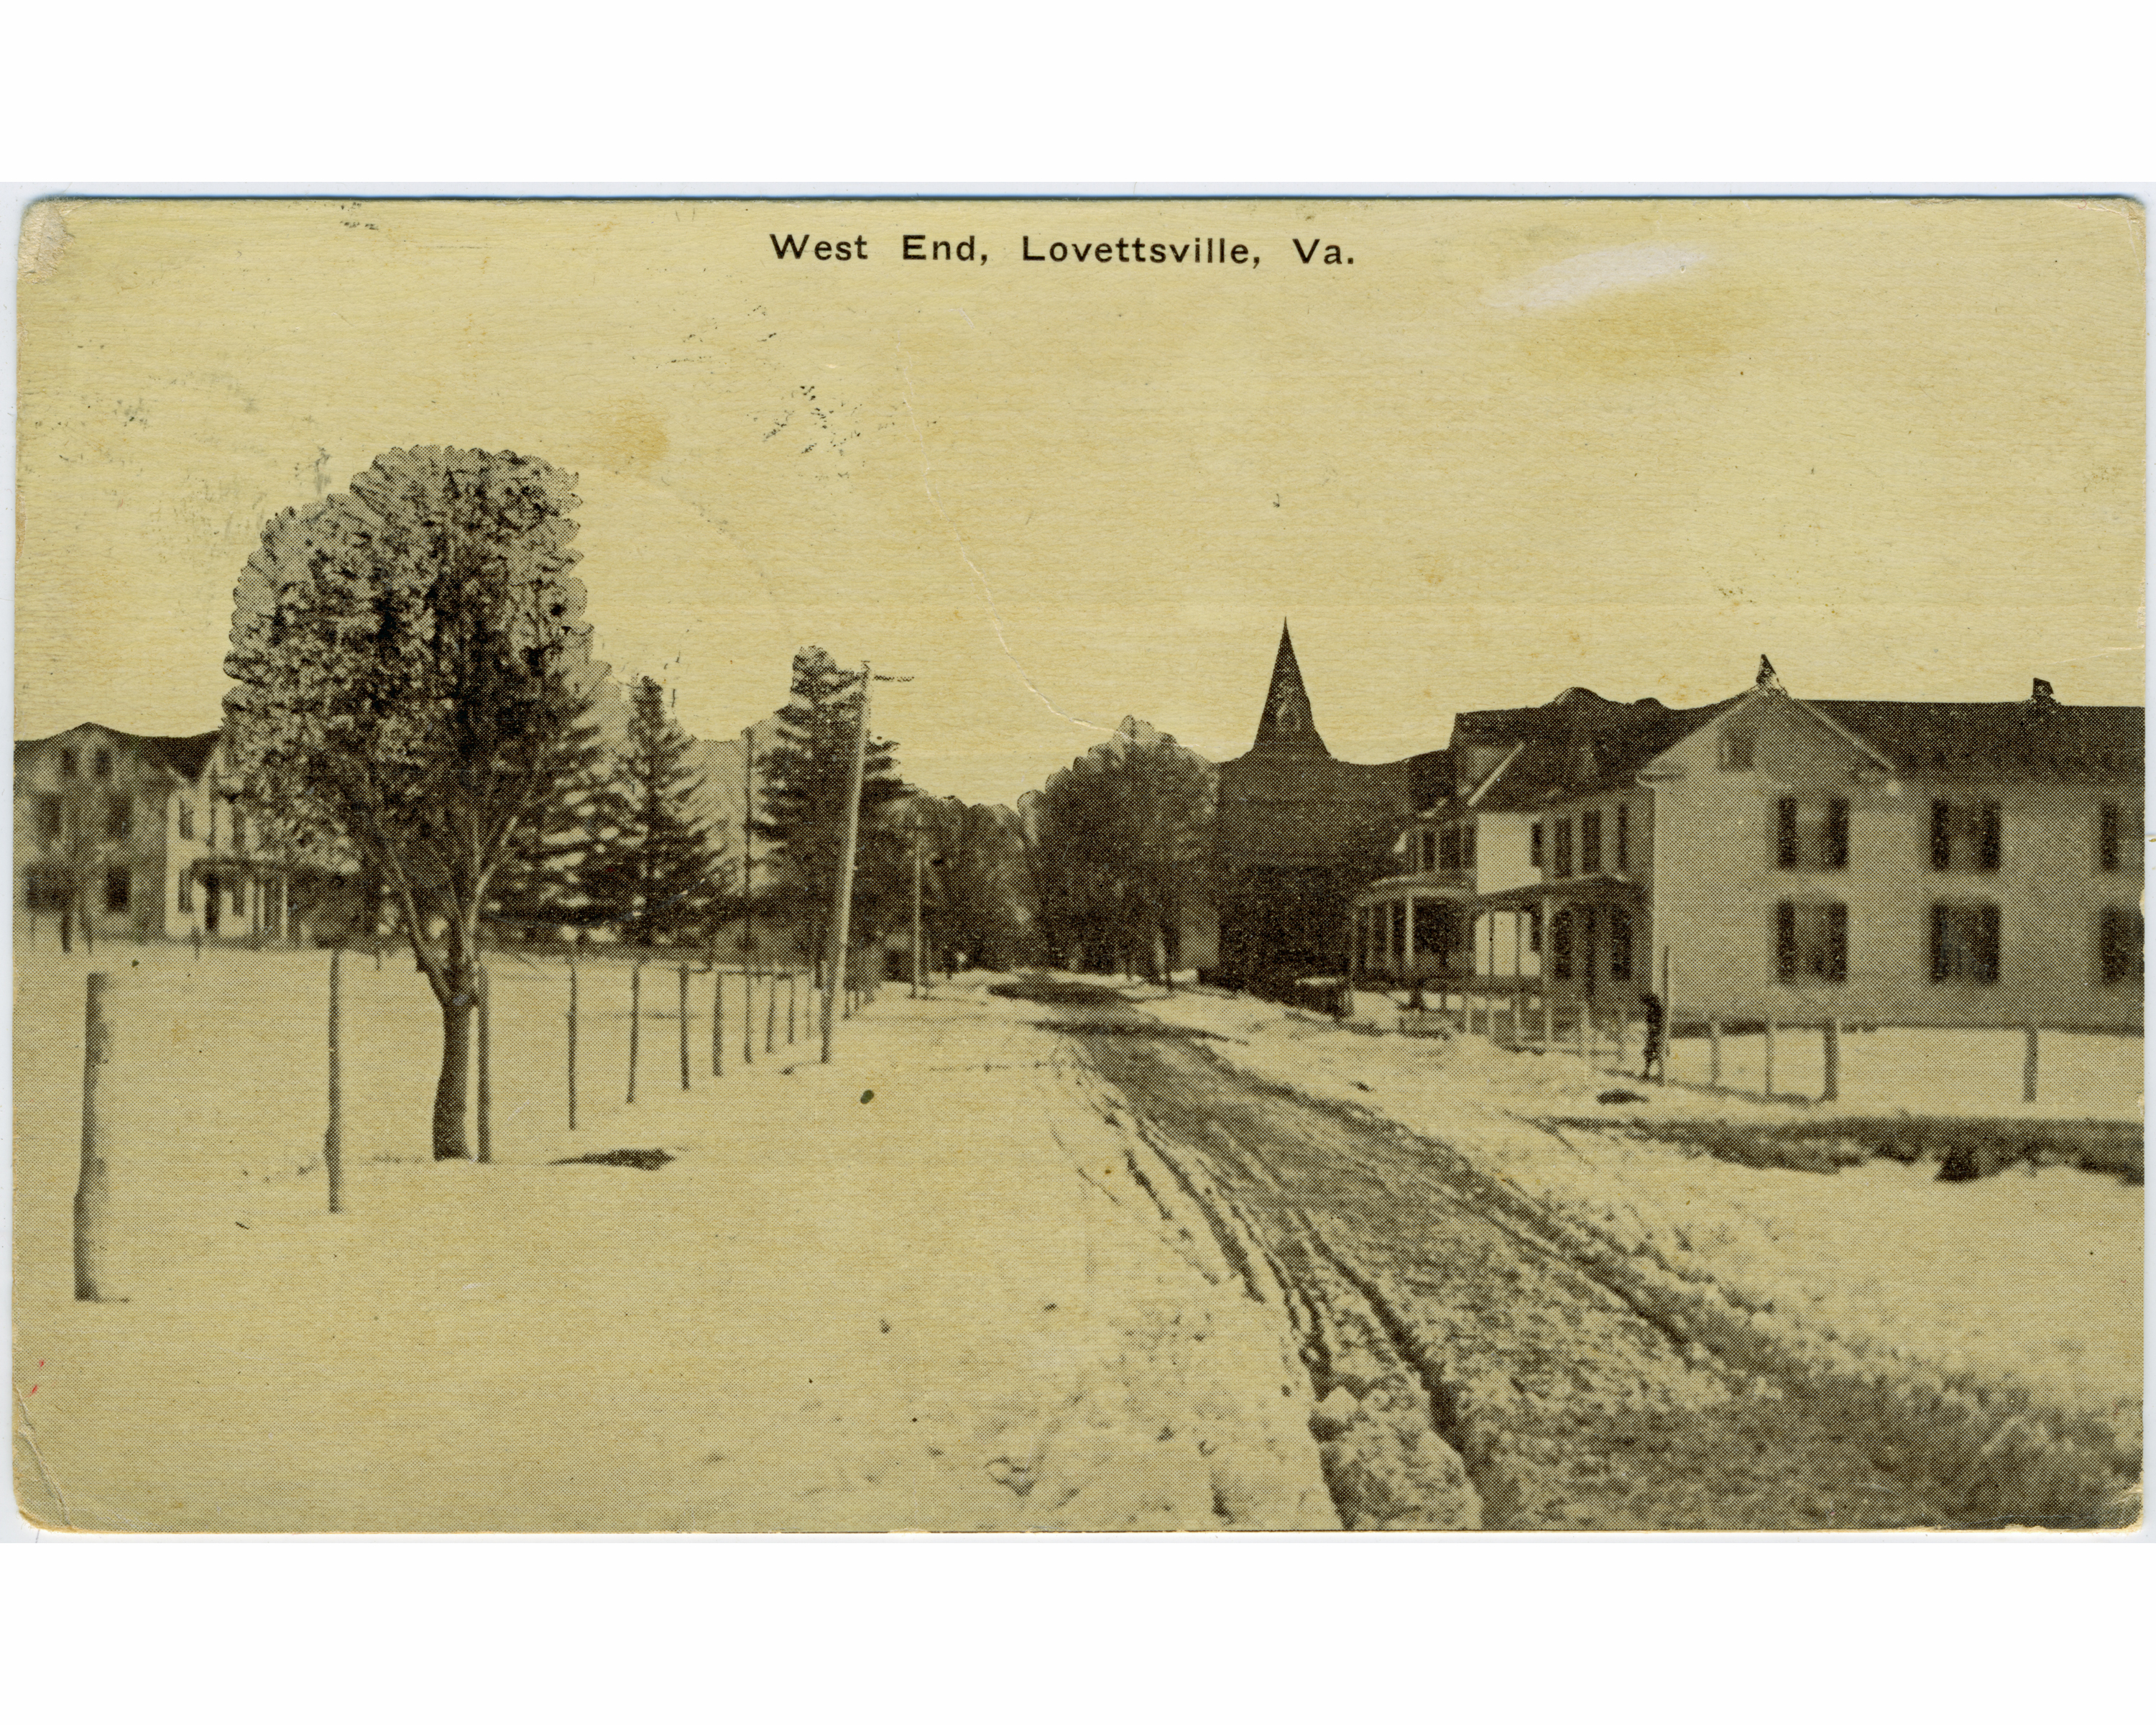 Thumbnail for the post titled: “West End, Lovettsville” 1915 Postcard Found By Dick Hickman (2016)